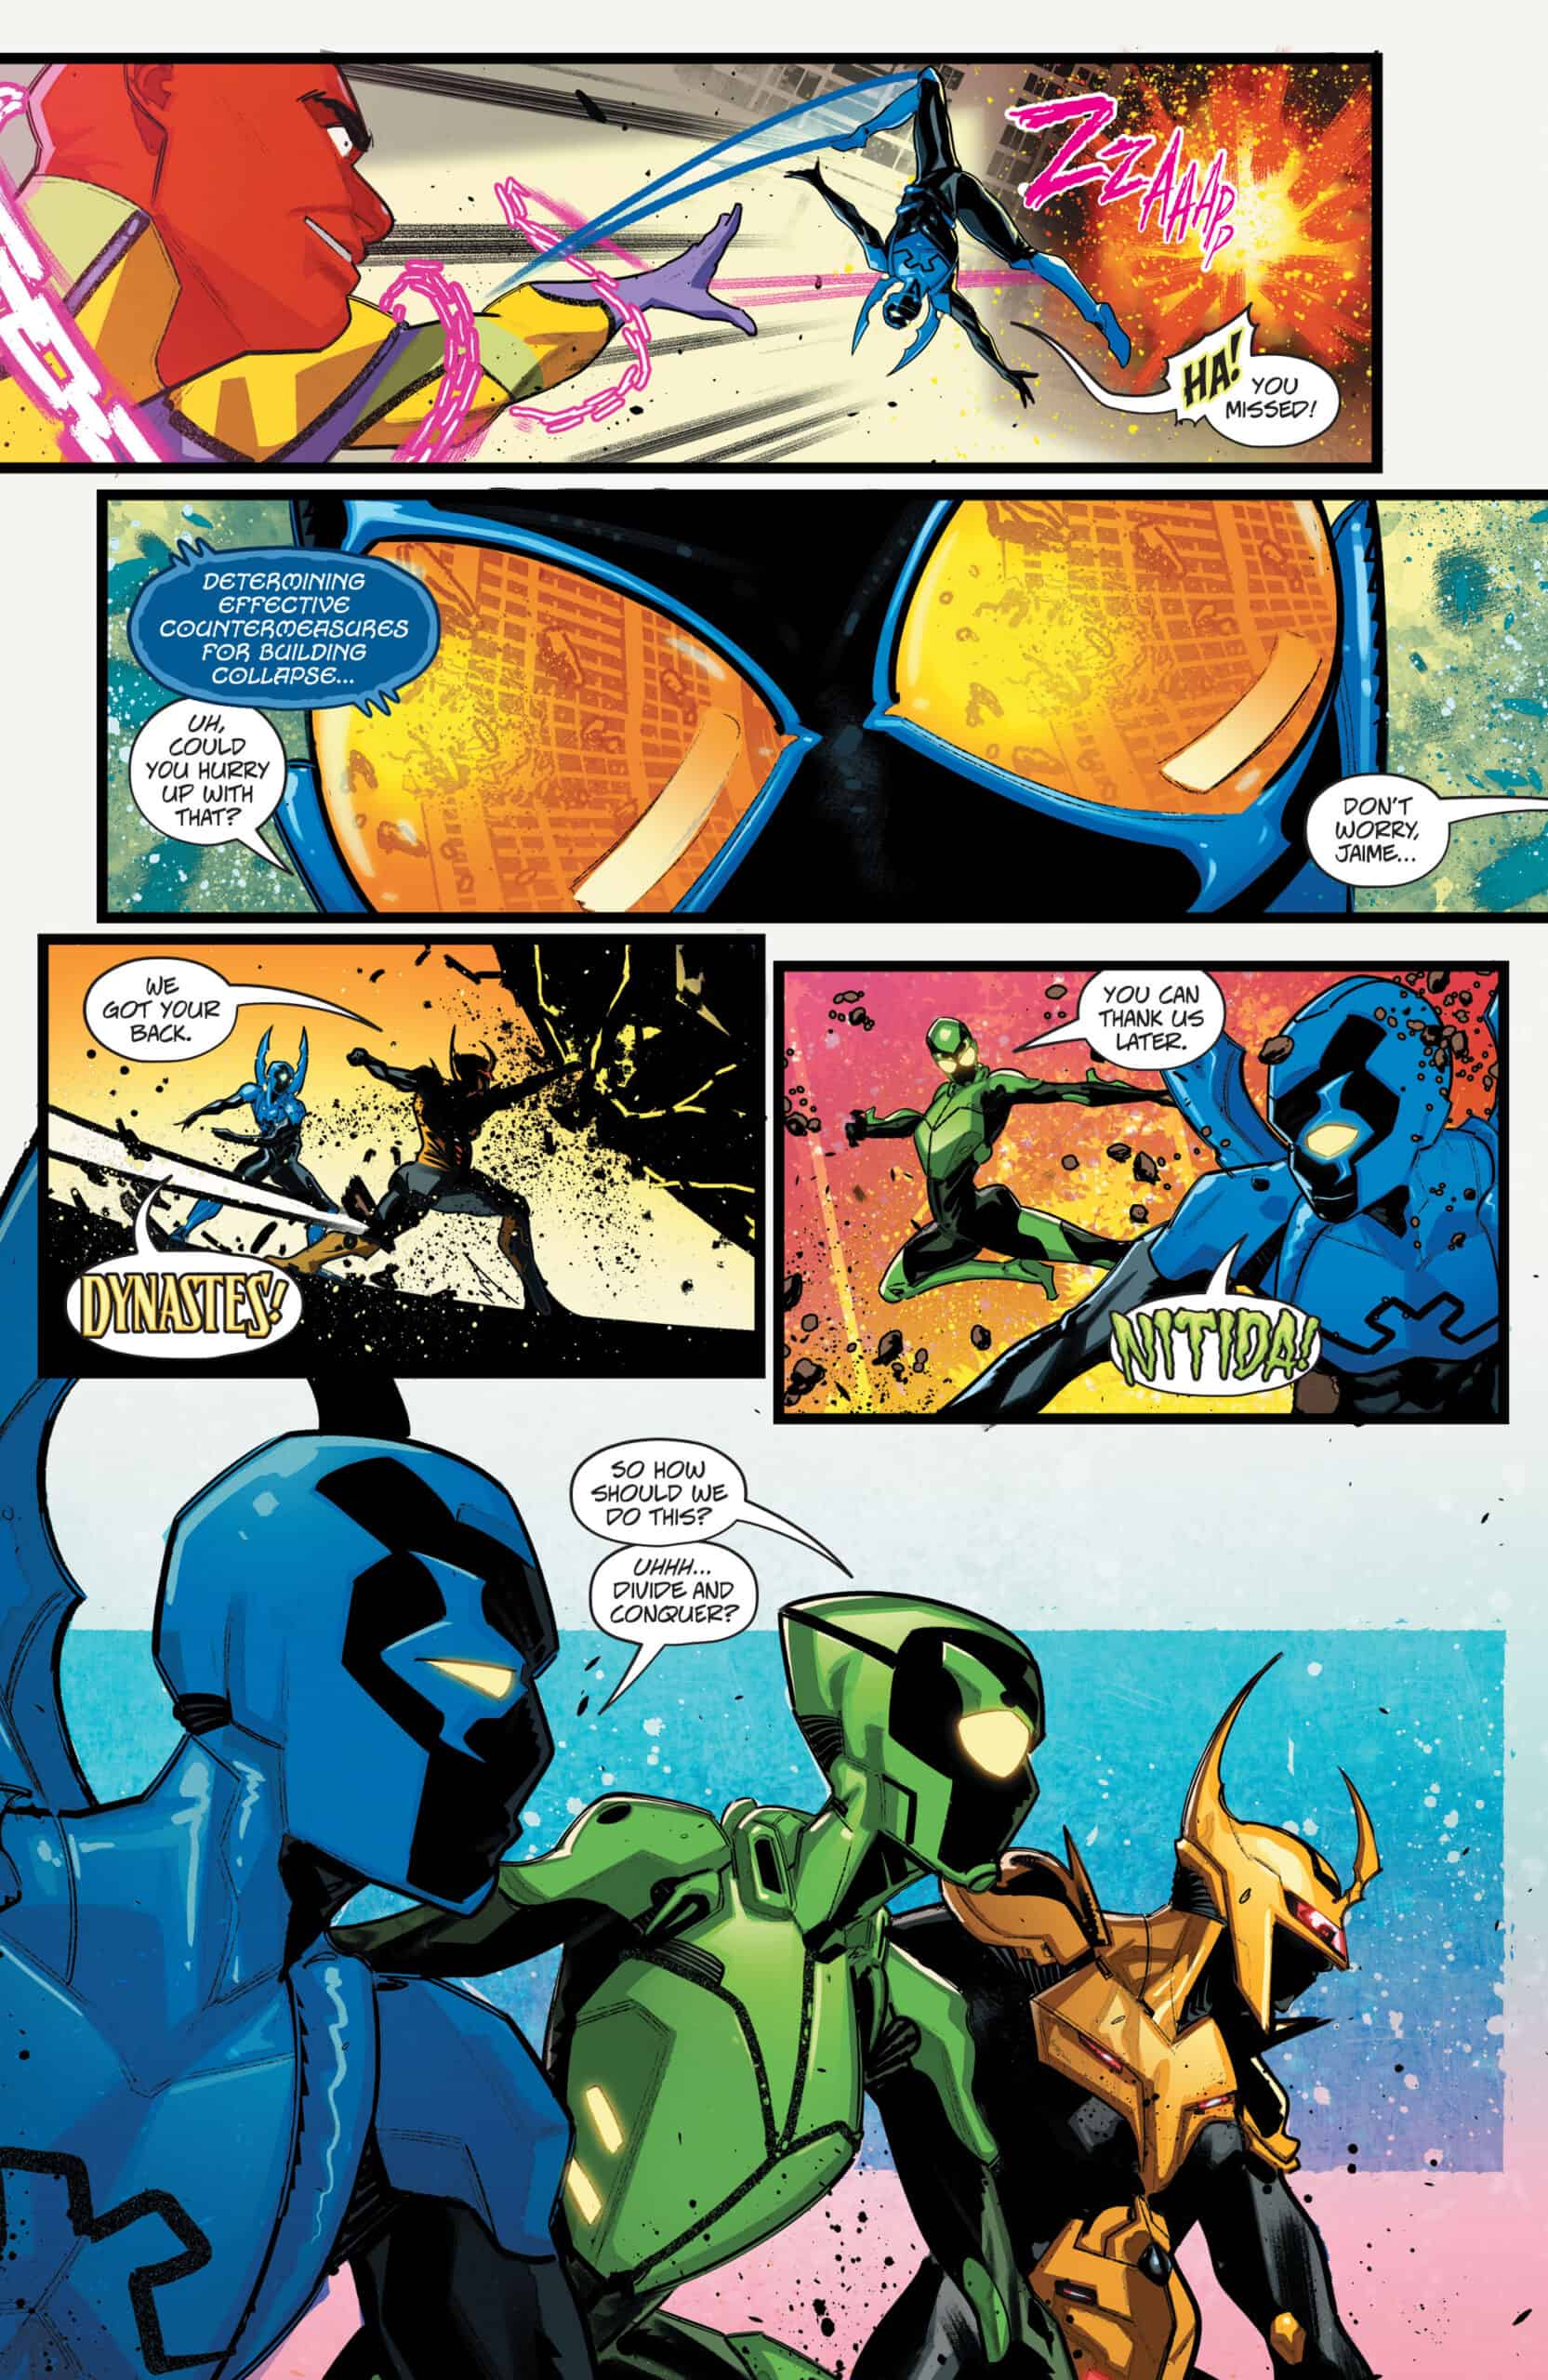 Blue Beetle Graduation Day #5: Old Enough to Choose - Comic Watch